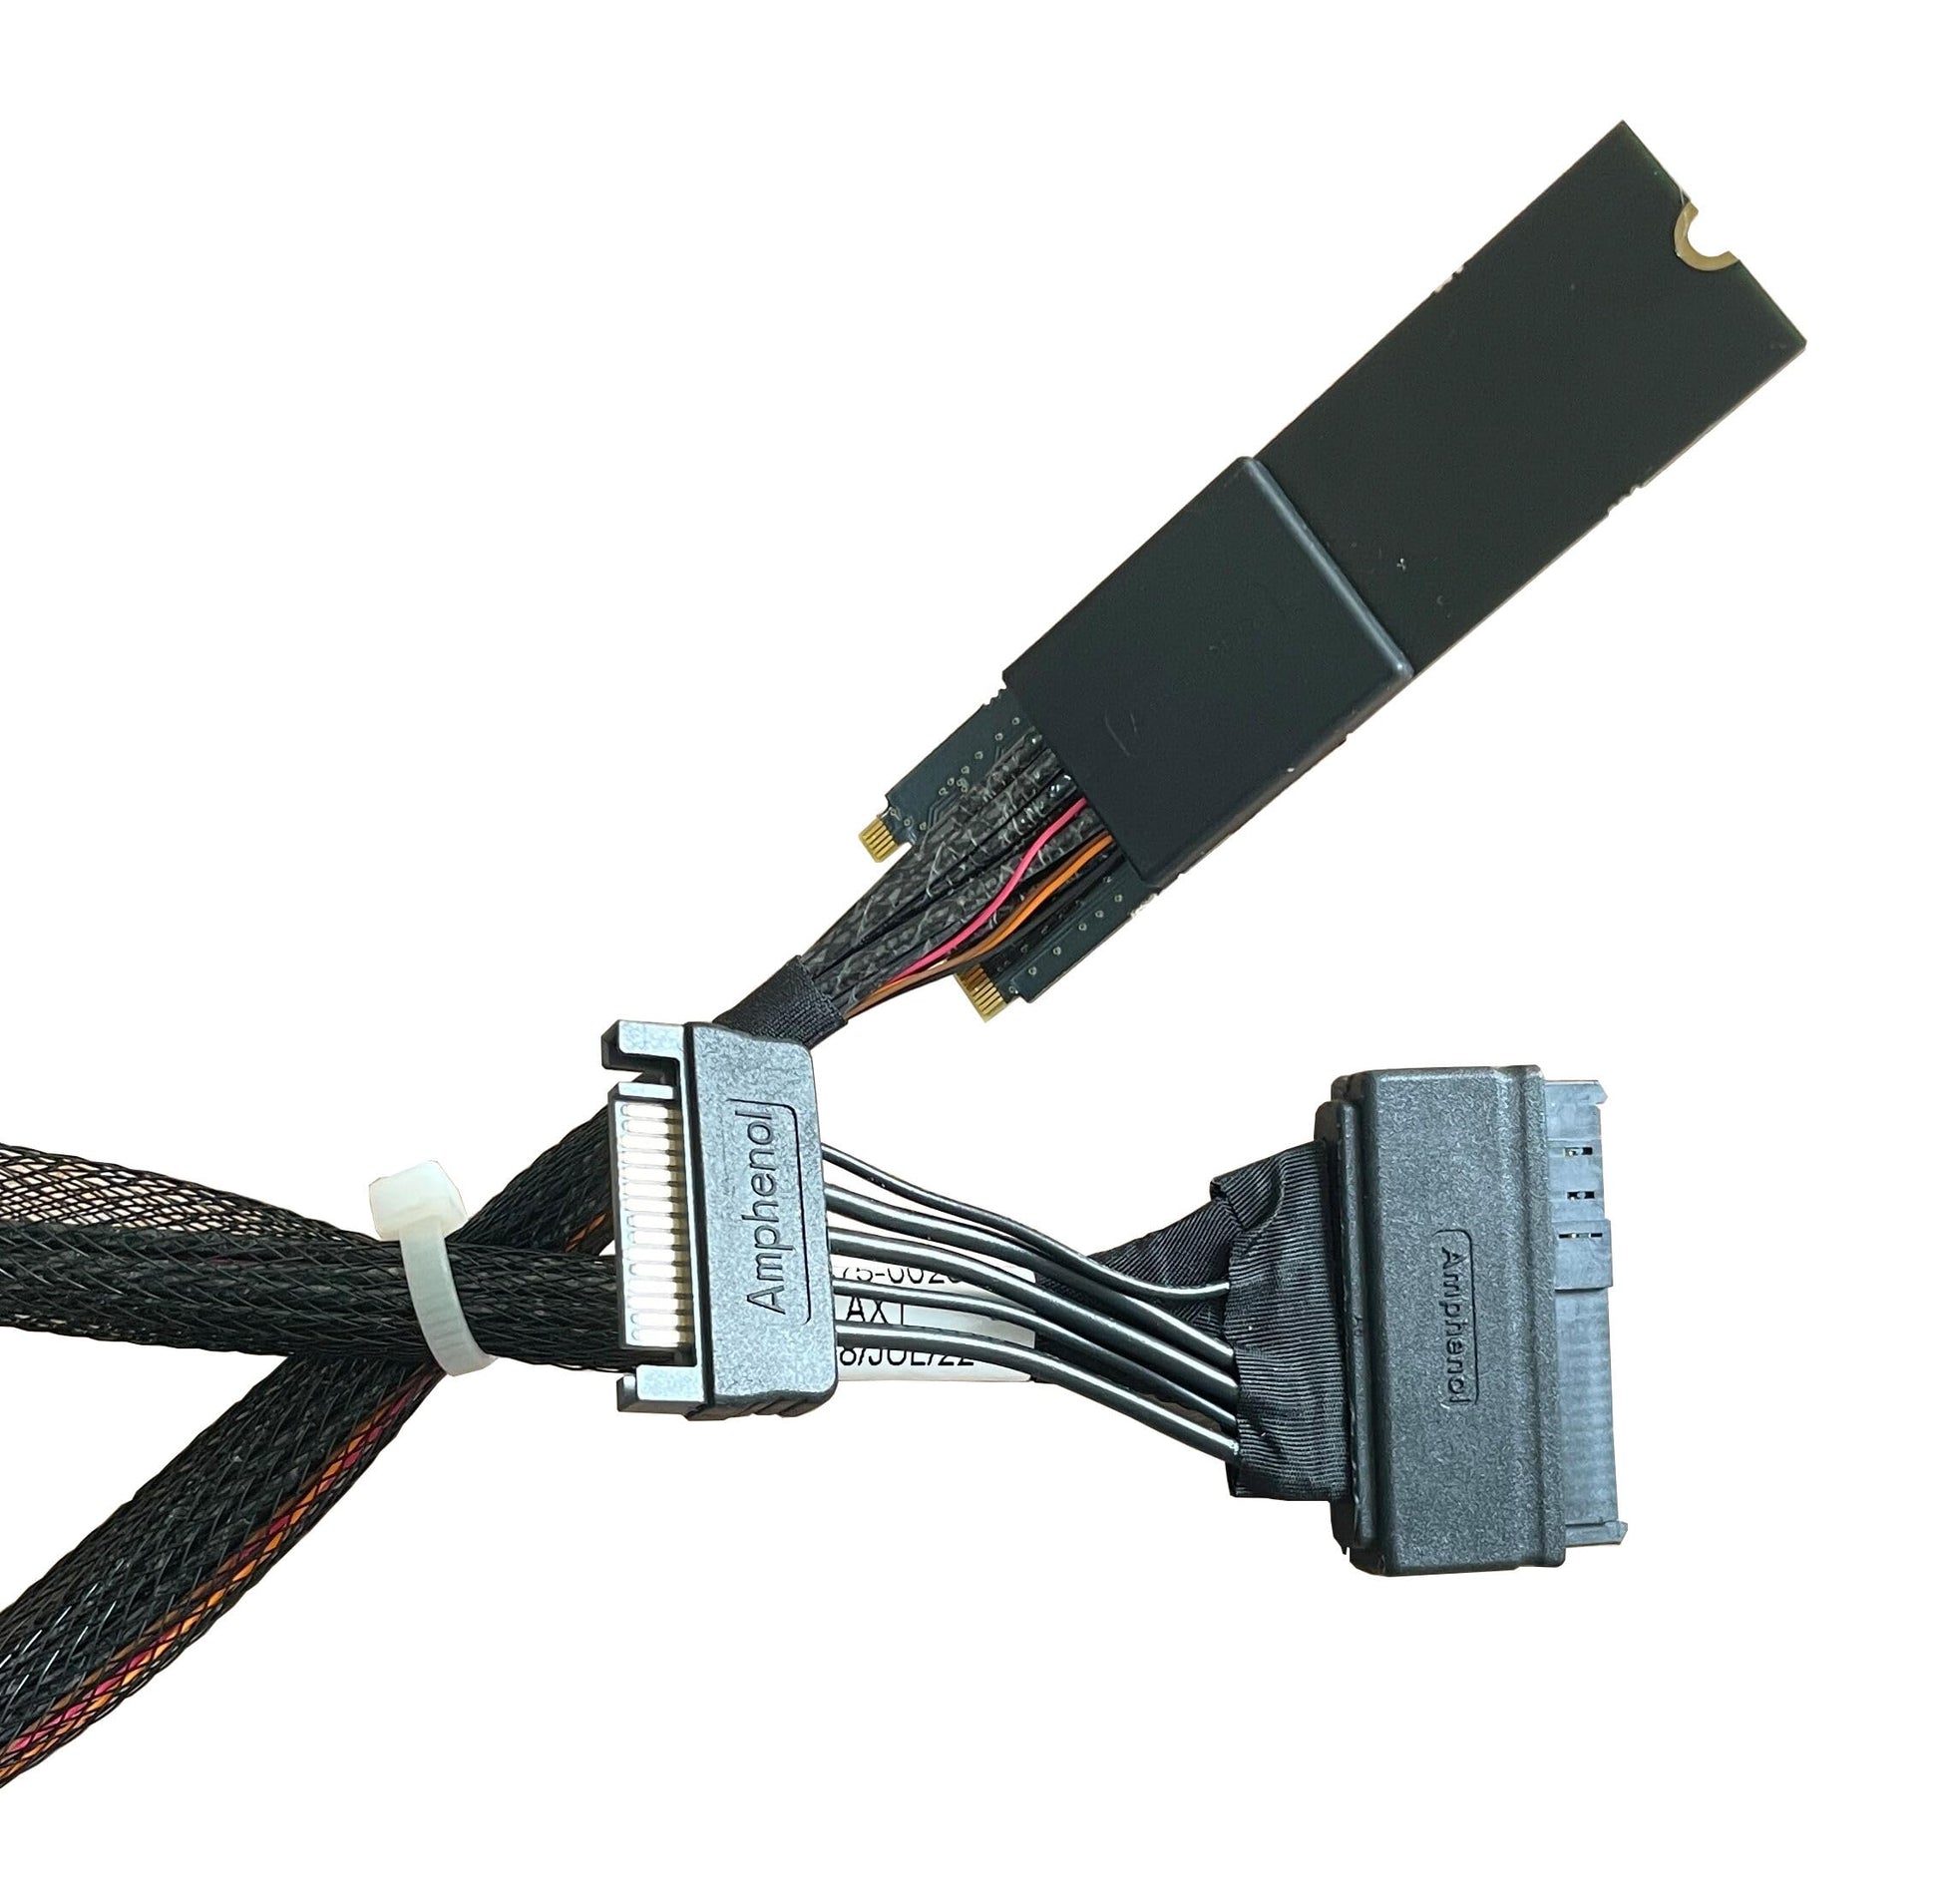 DiliVing PCIe 5.0 M.2 to U.2 NVMe SSD,SFF-8639 Drive to M.2 Host Adapter,U.2 SSD Converter -with Power Cable(75CM)